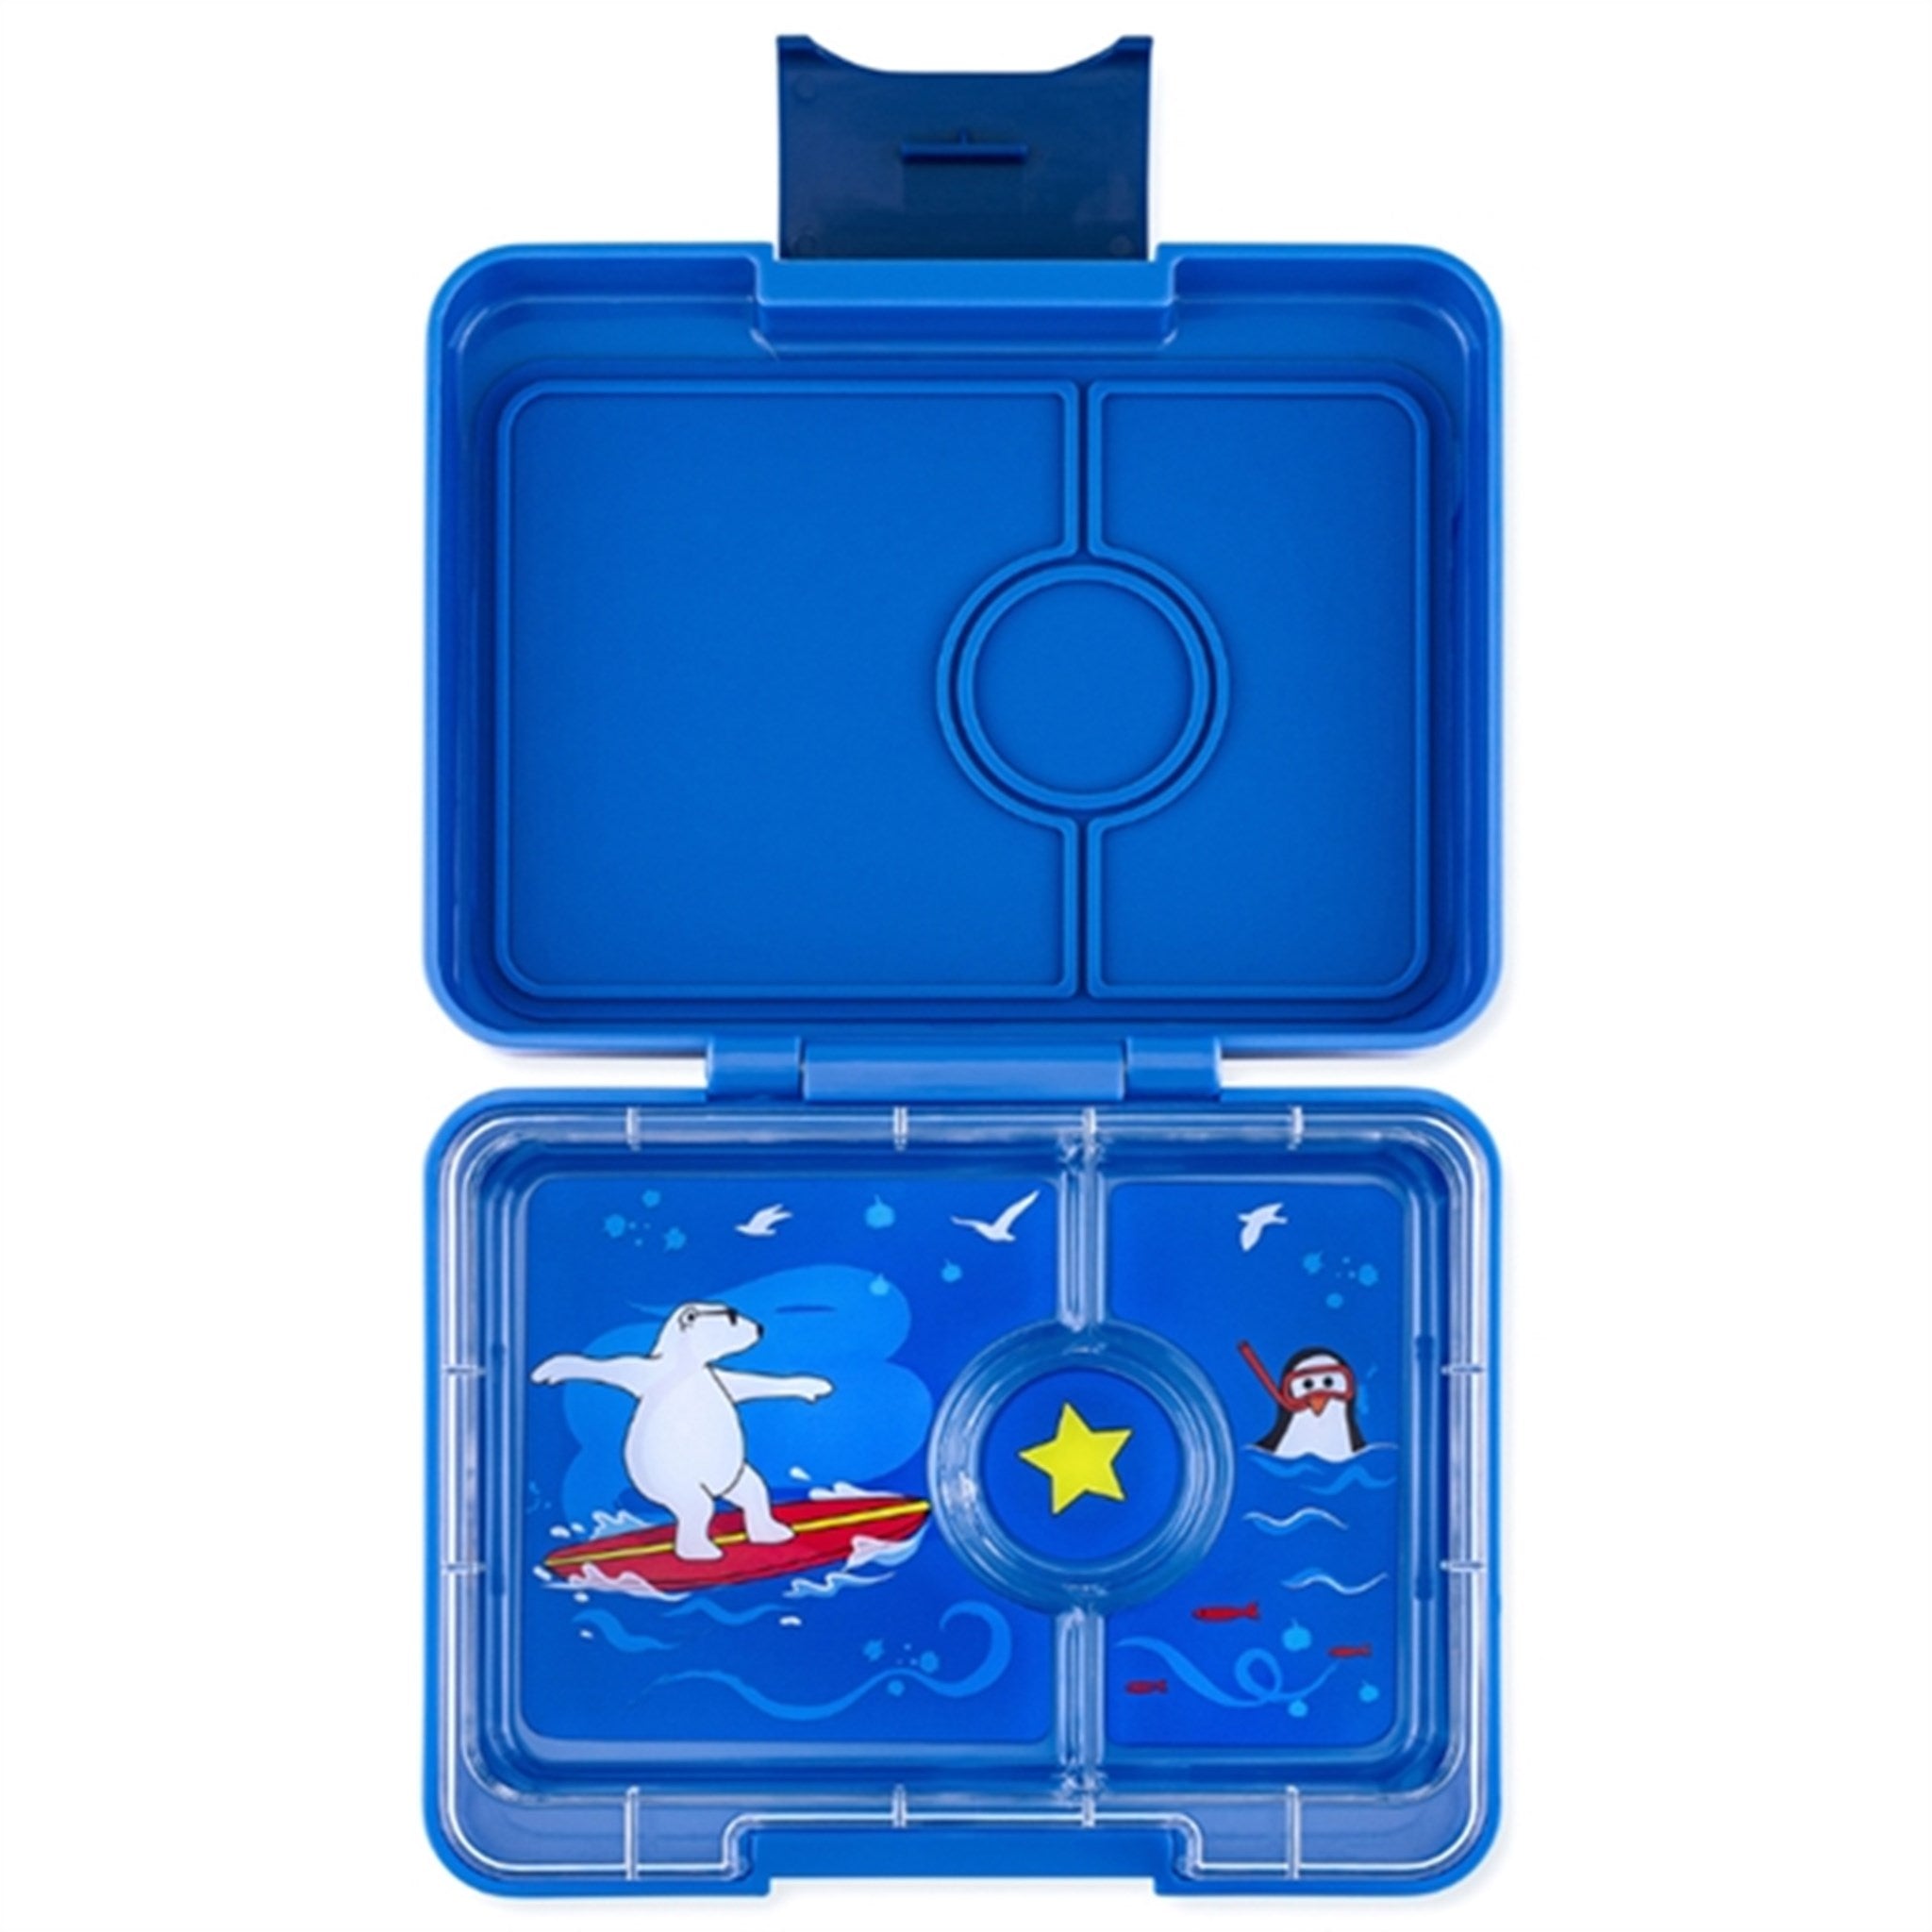 Yumbox Snack 3 sections Lunchbox Surf Blue / Polar Bear Tray